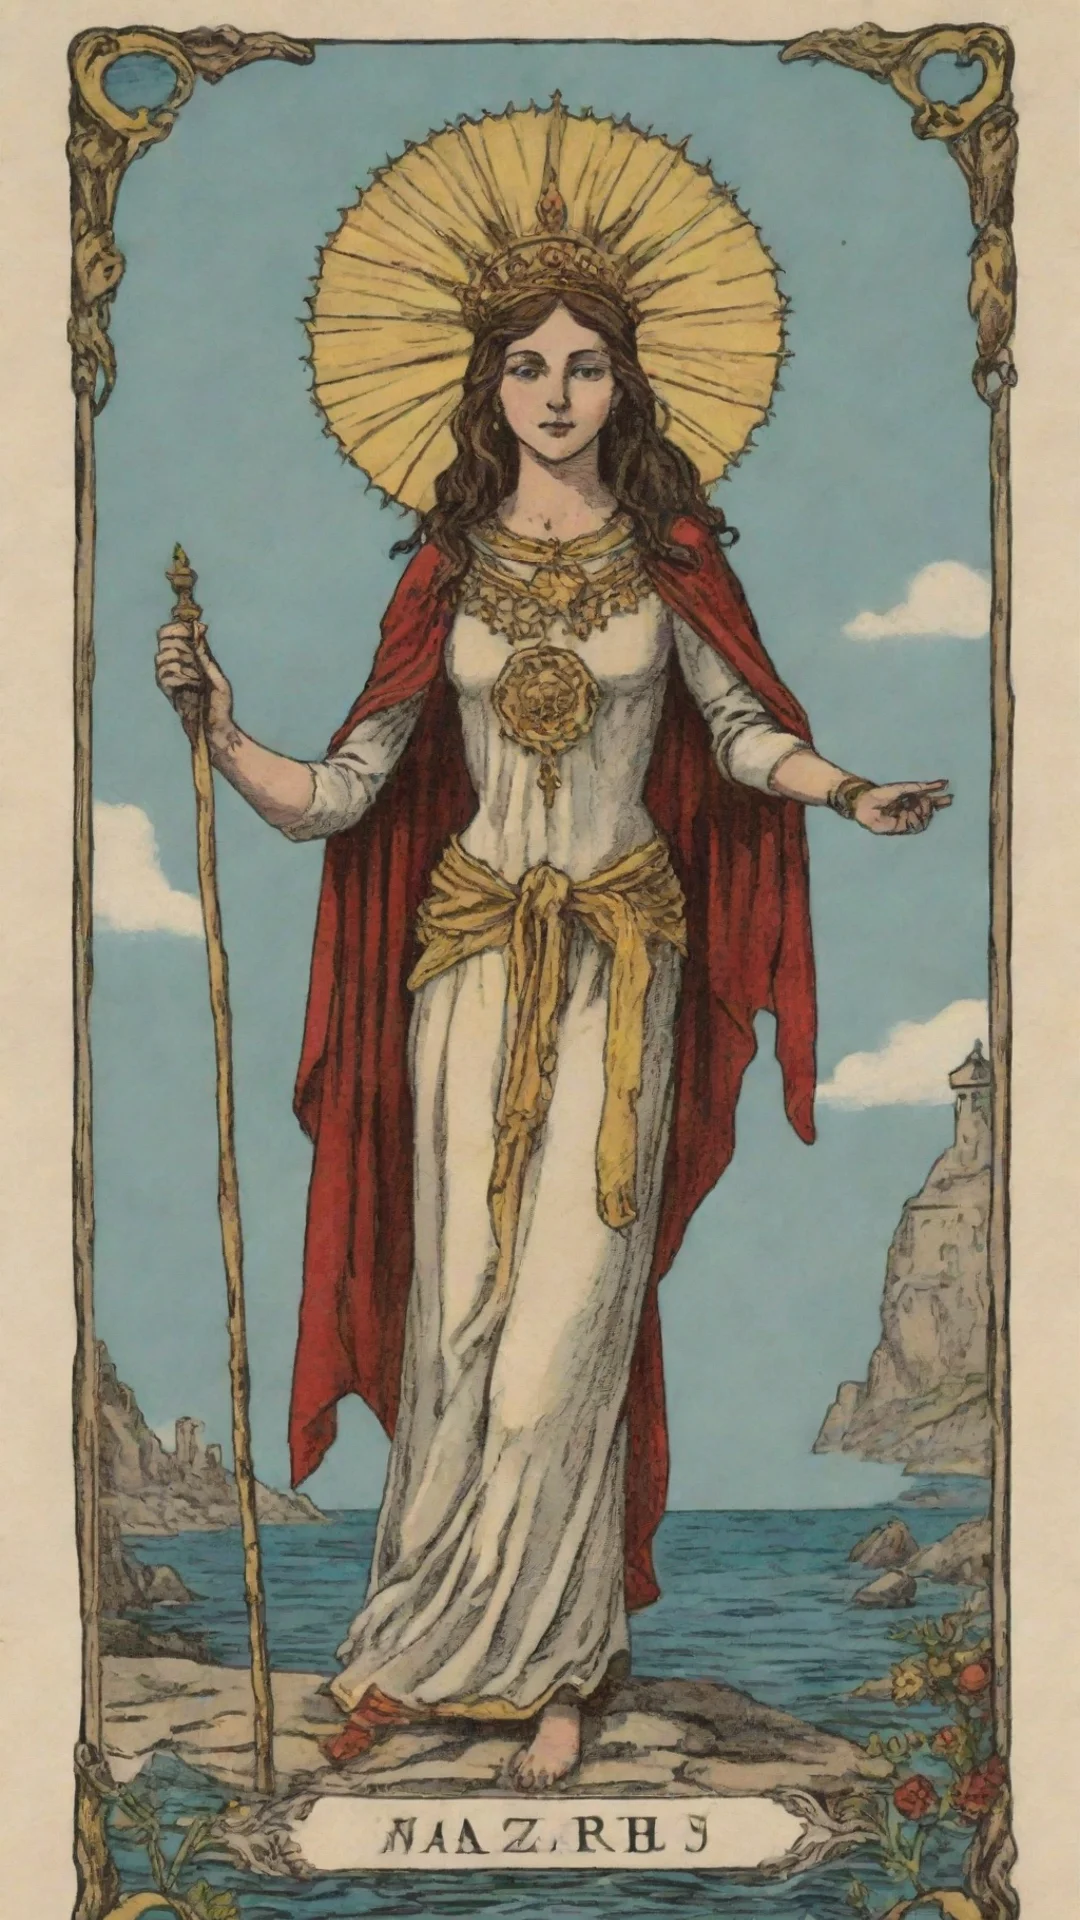 aigenerate a tarot card in the marseille style but original as an illustration tall